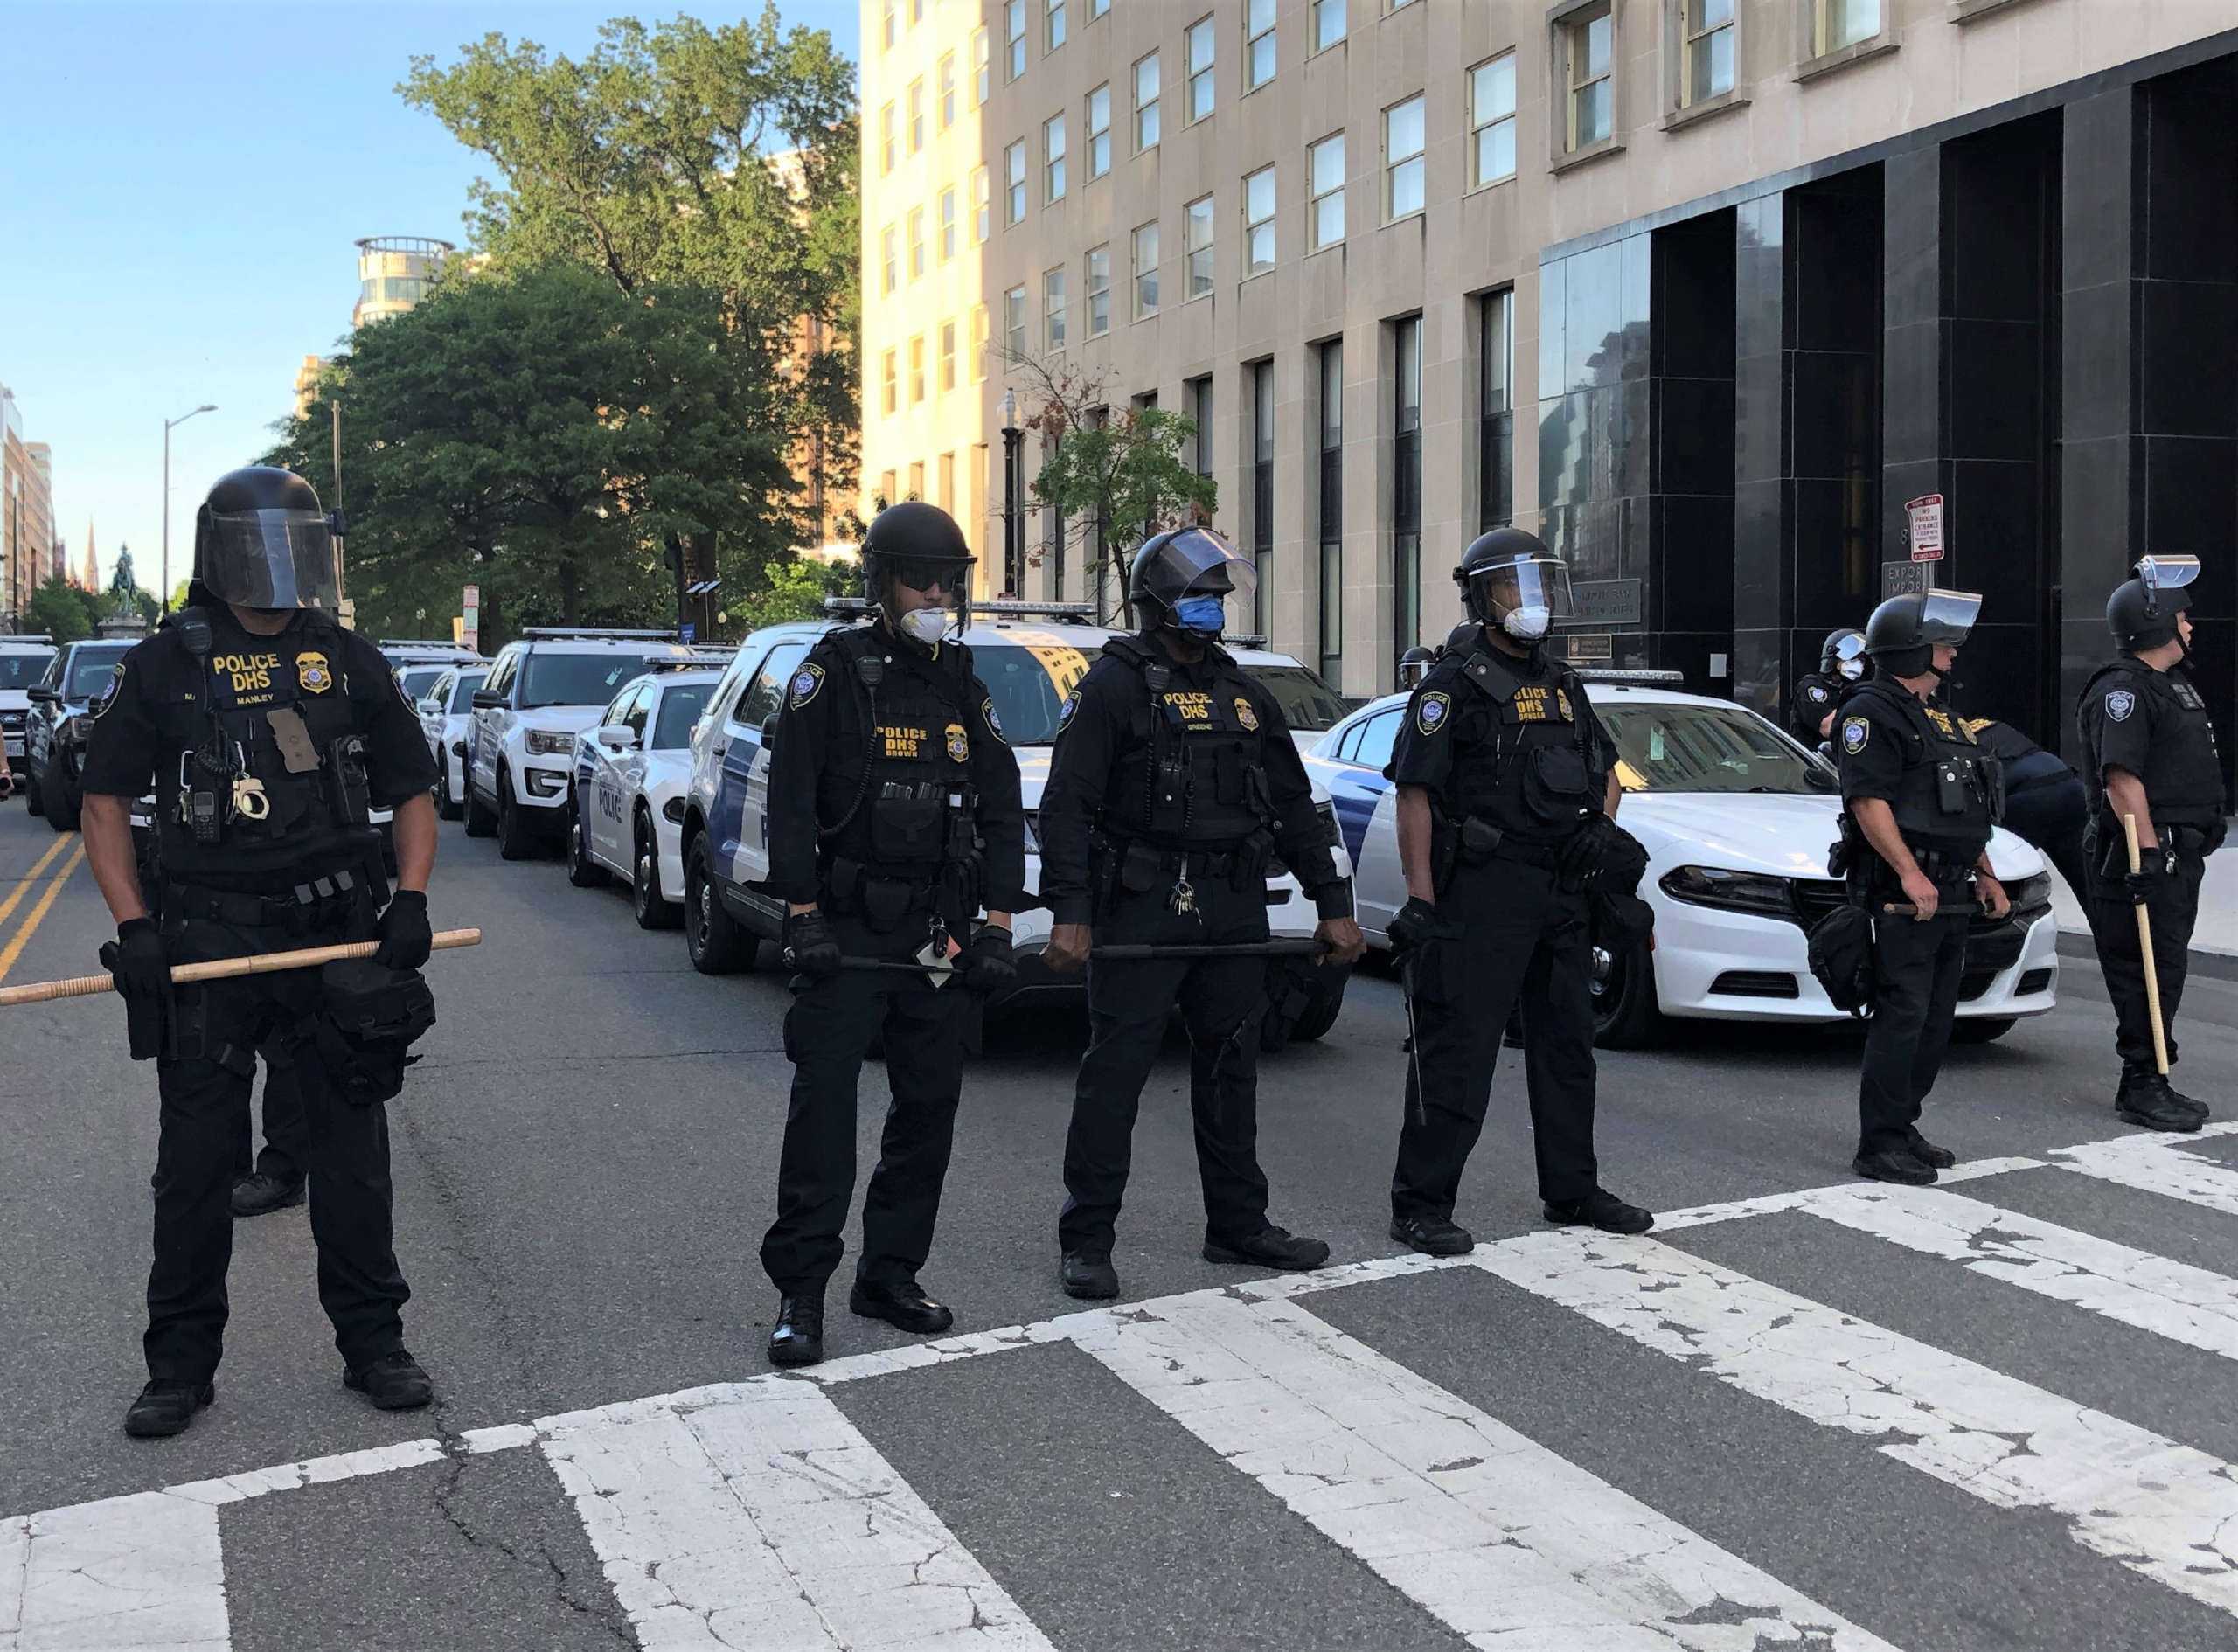 Law enforcement agents and the military were out in full force on June 1, shooting bean bags and flash-bangs, assaulting and using tear gas against peaceful protesters. This photo shows Department of Homeland Security officers “protecting” a D.C. Street.